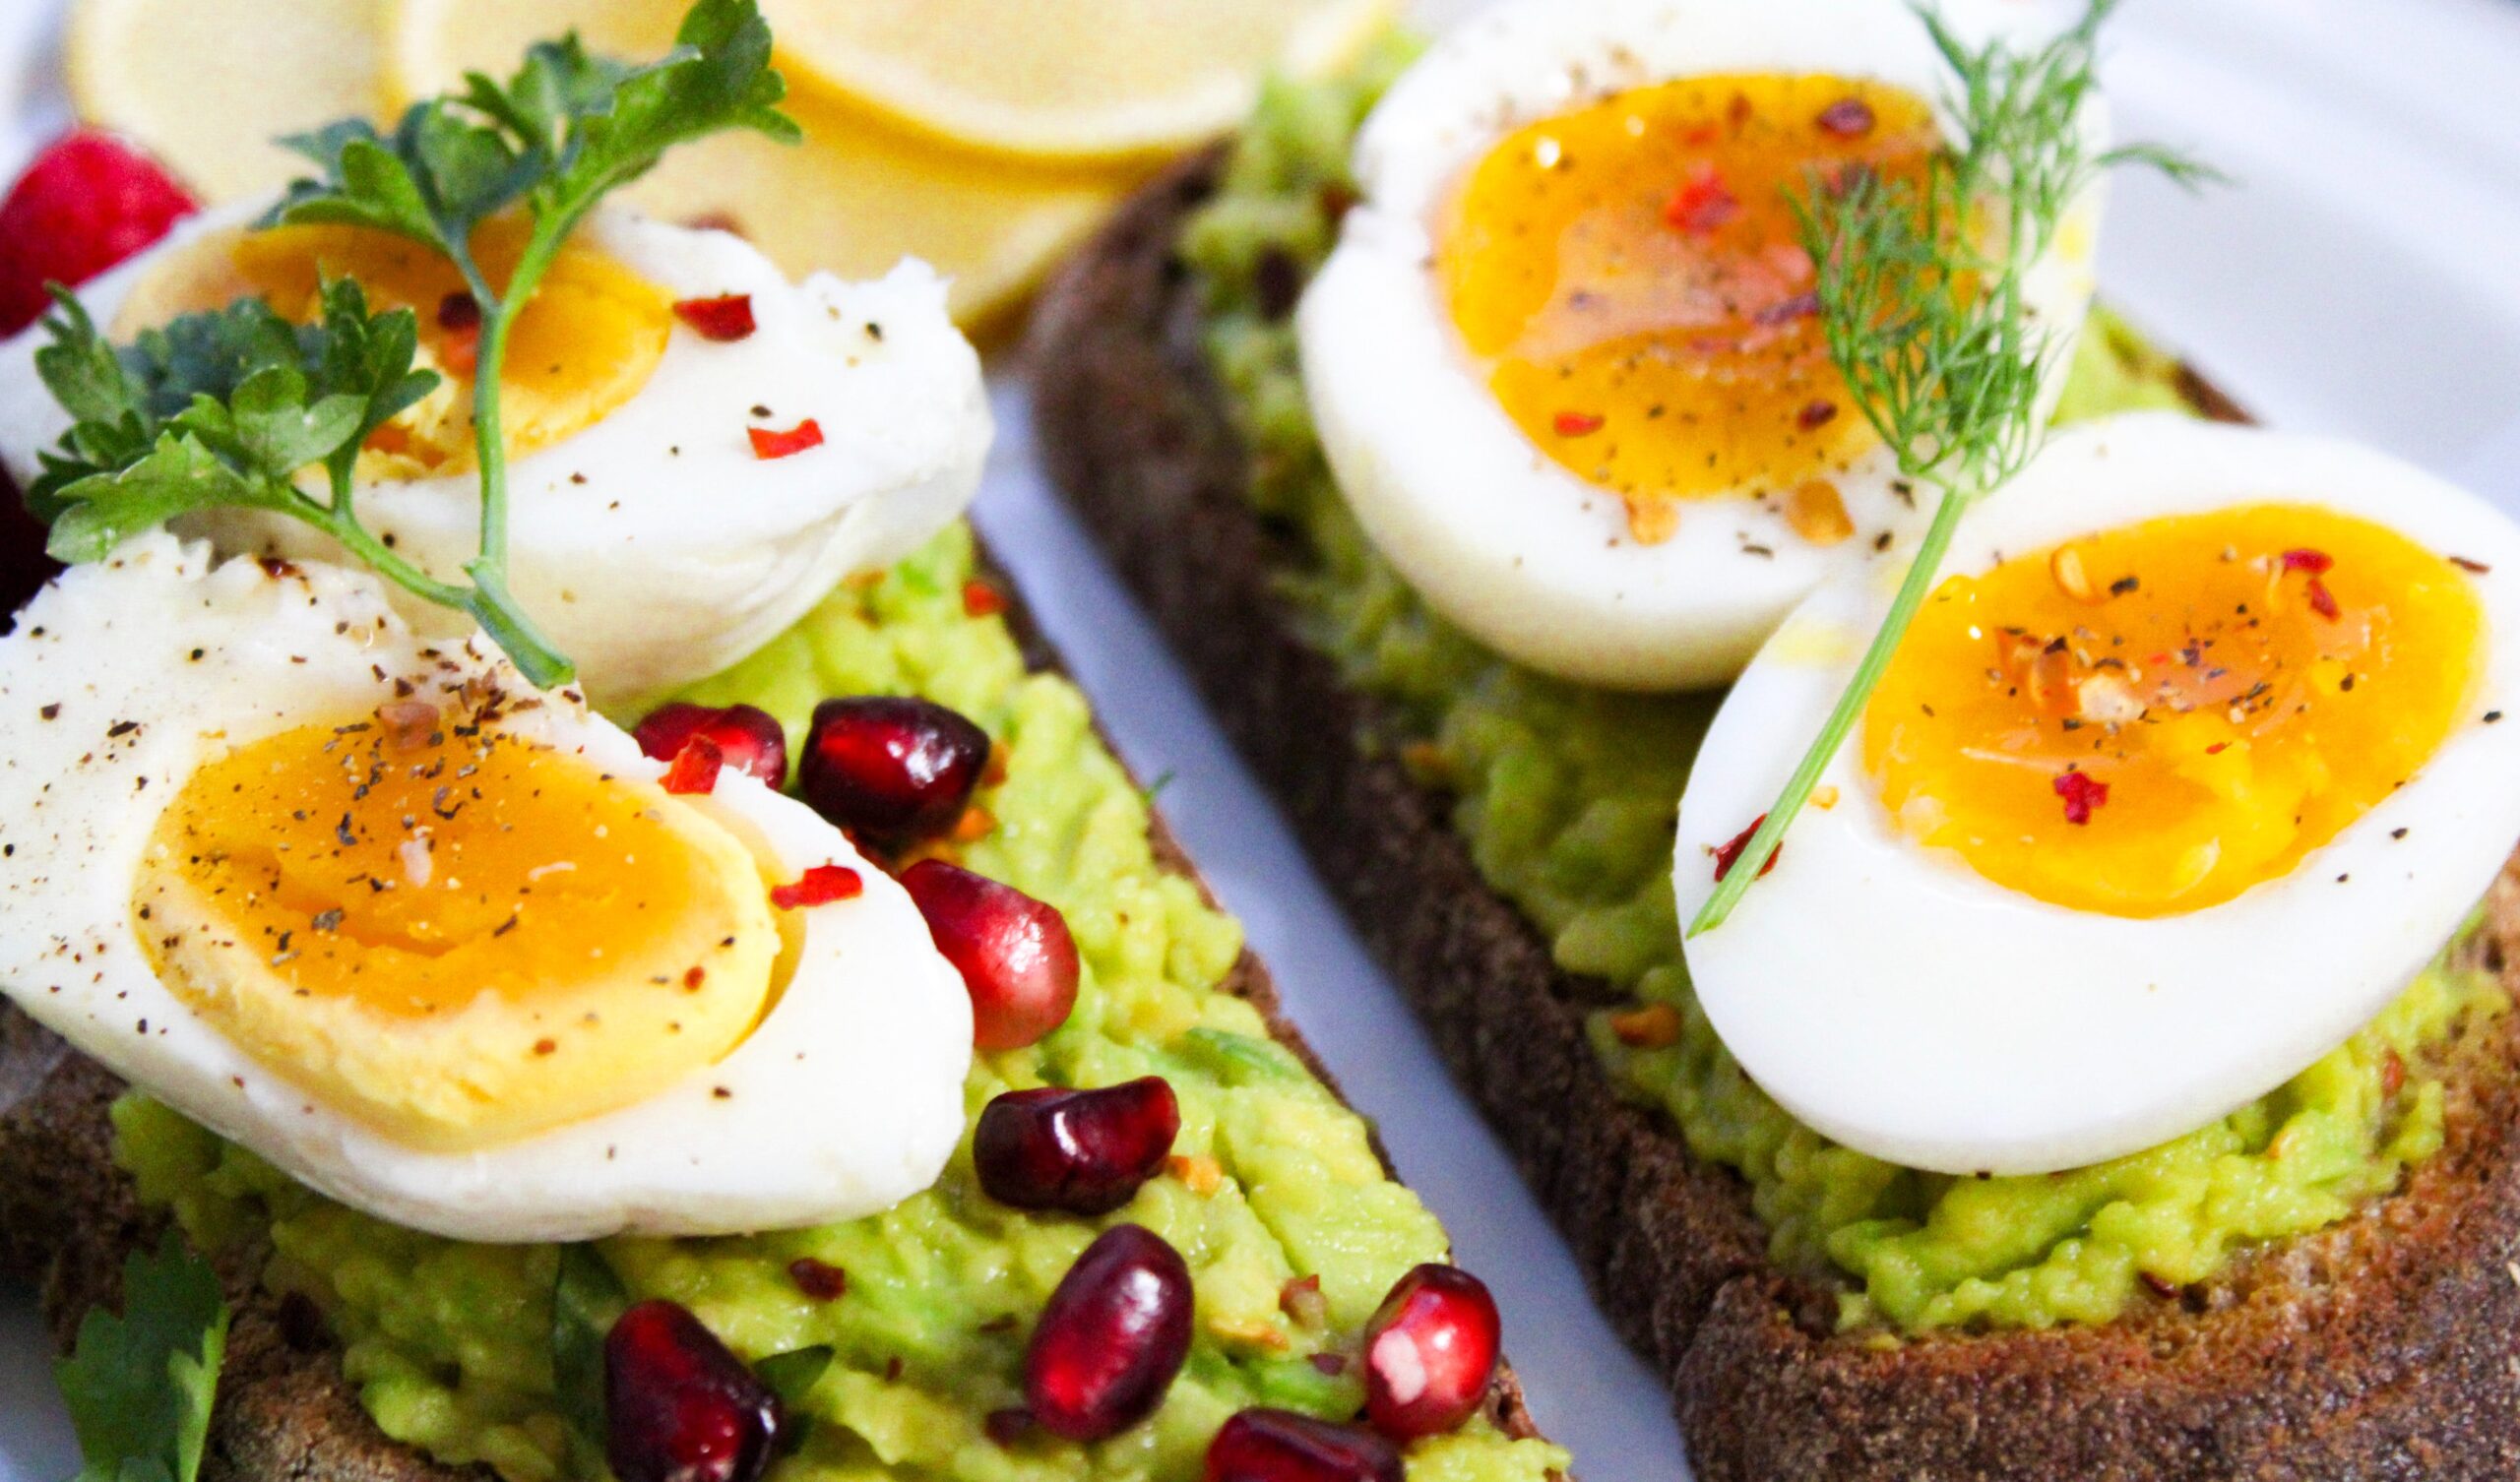  Busy Mornings? Simple Healthy Breakfast Ideas For People On-The-Go